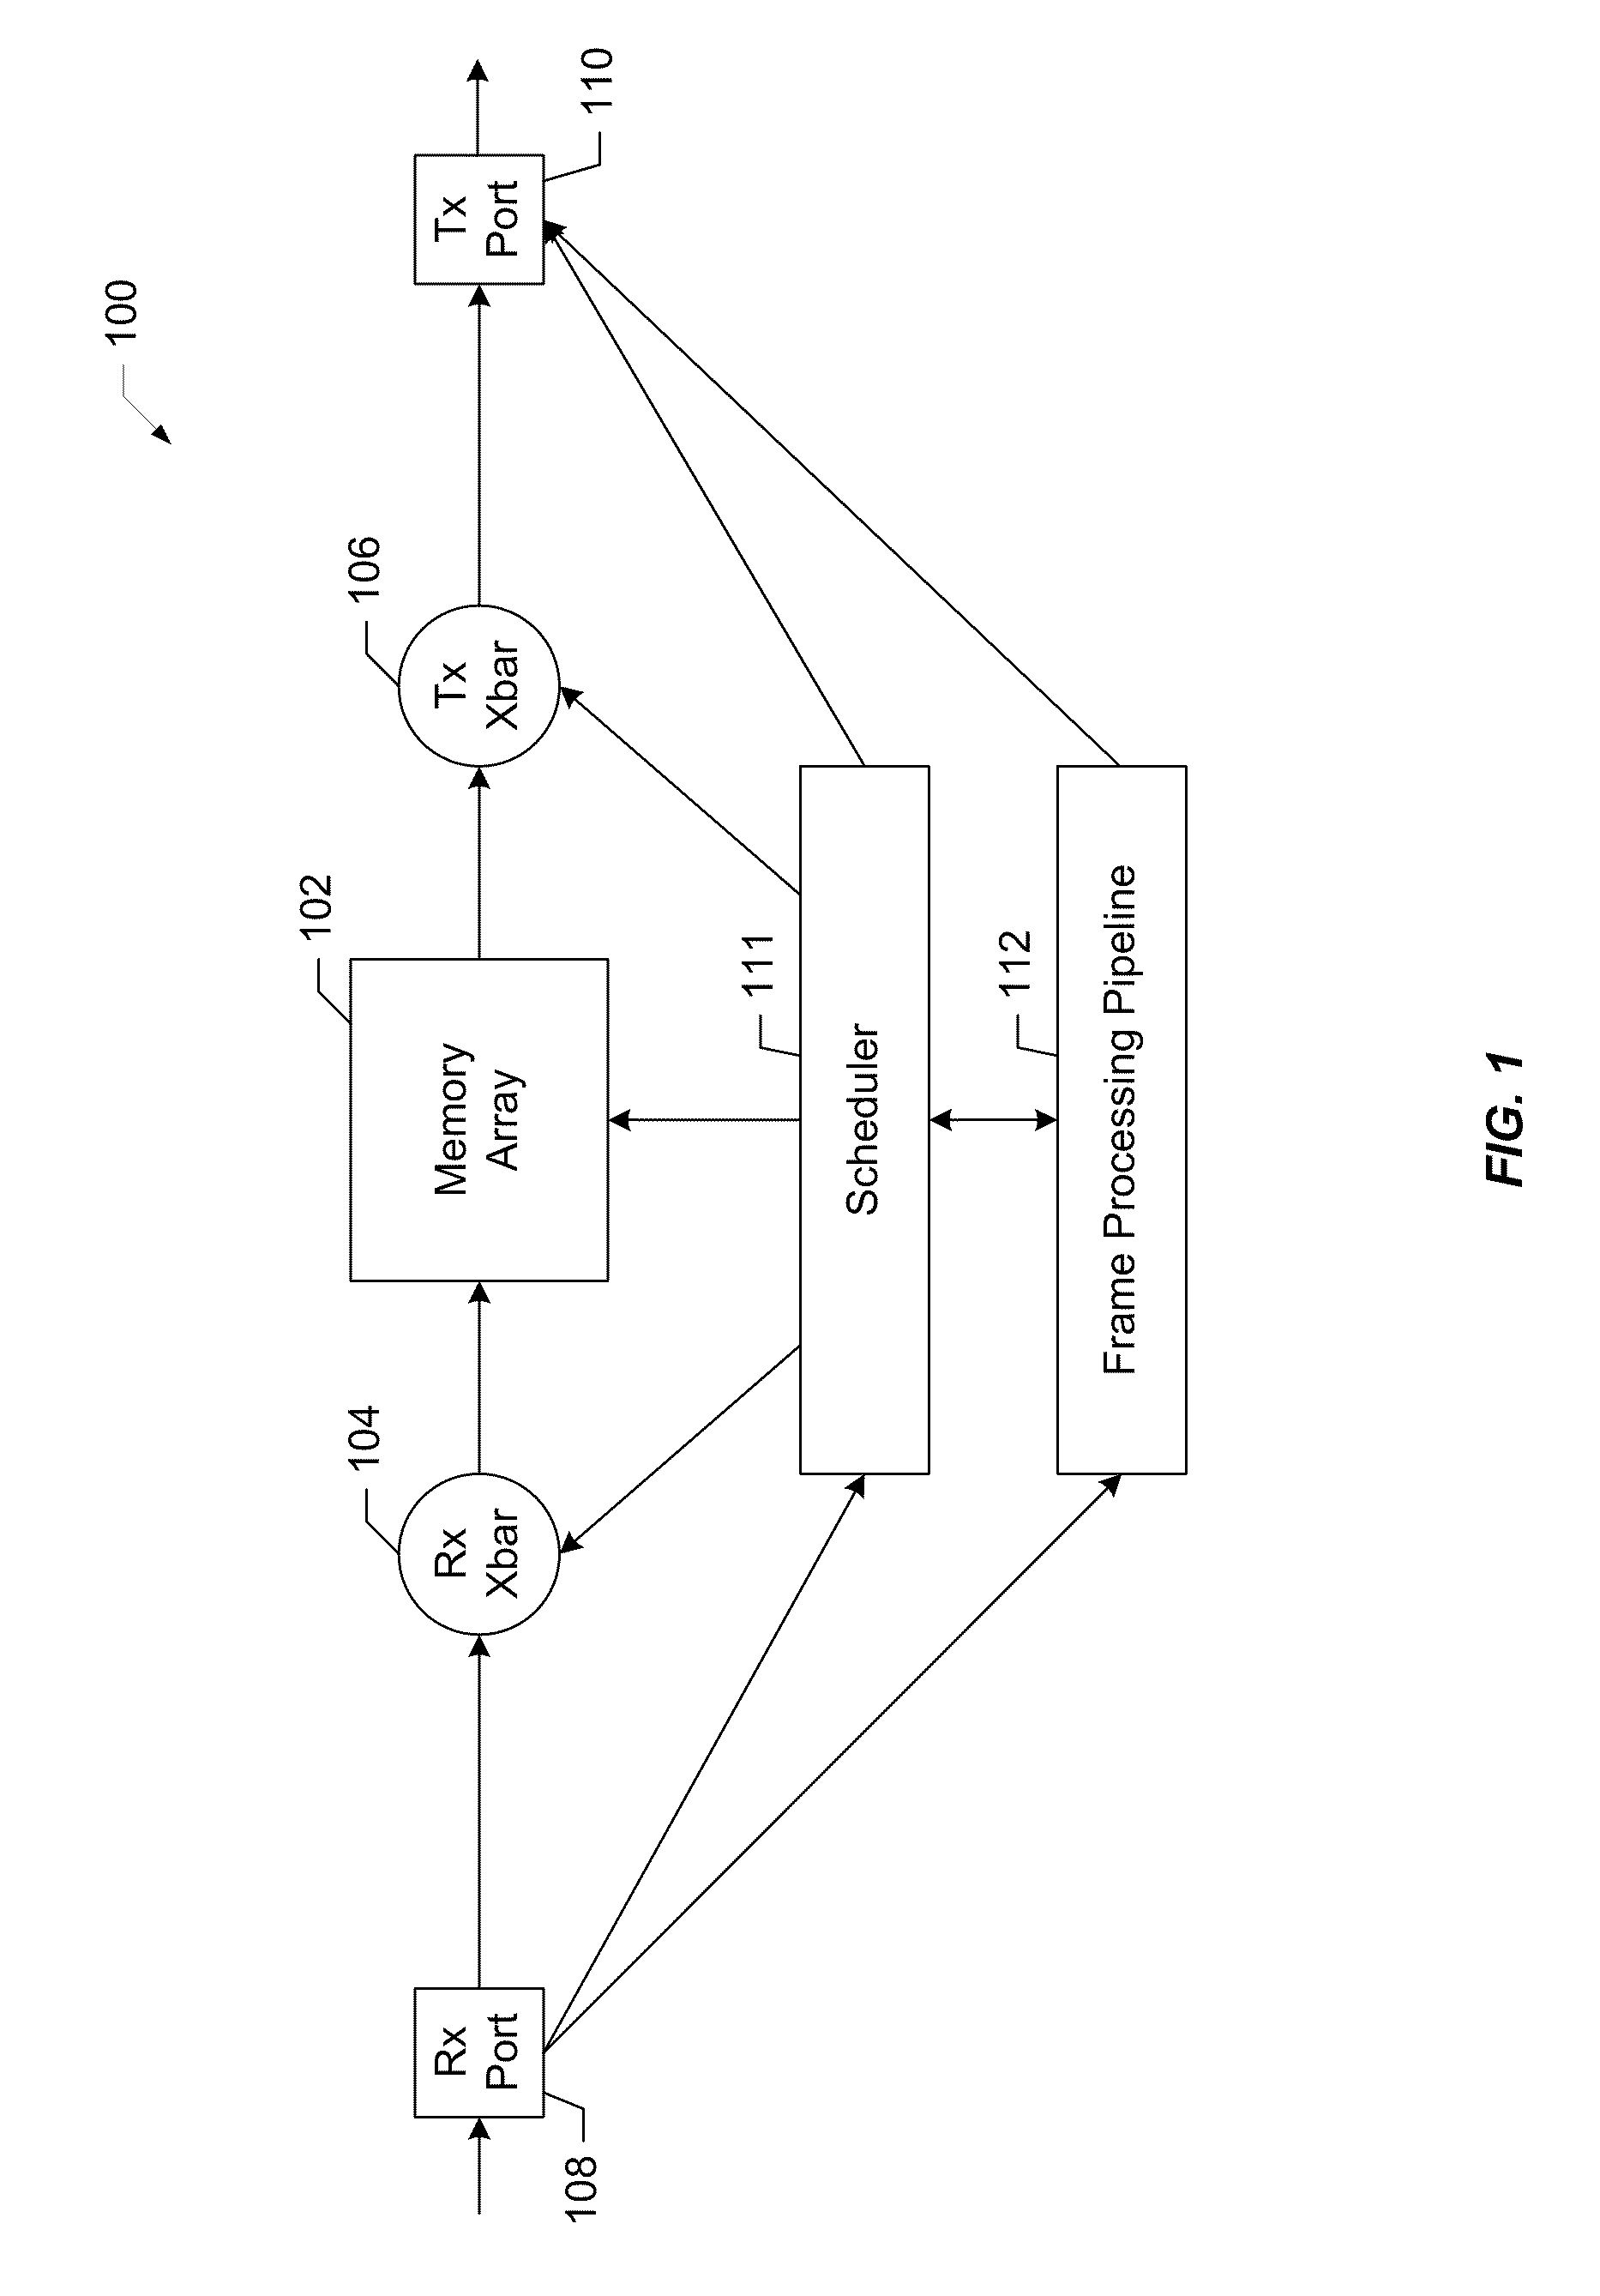 Configurable frame processing pipeline in a packet switch